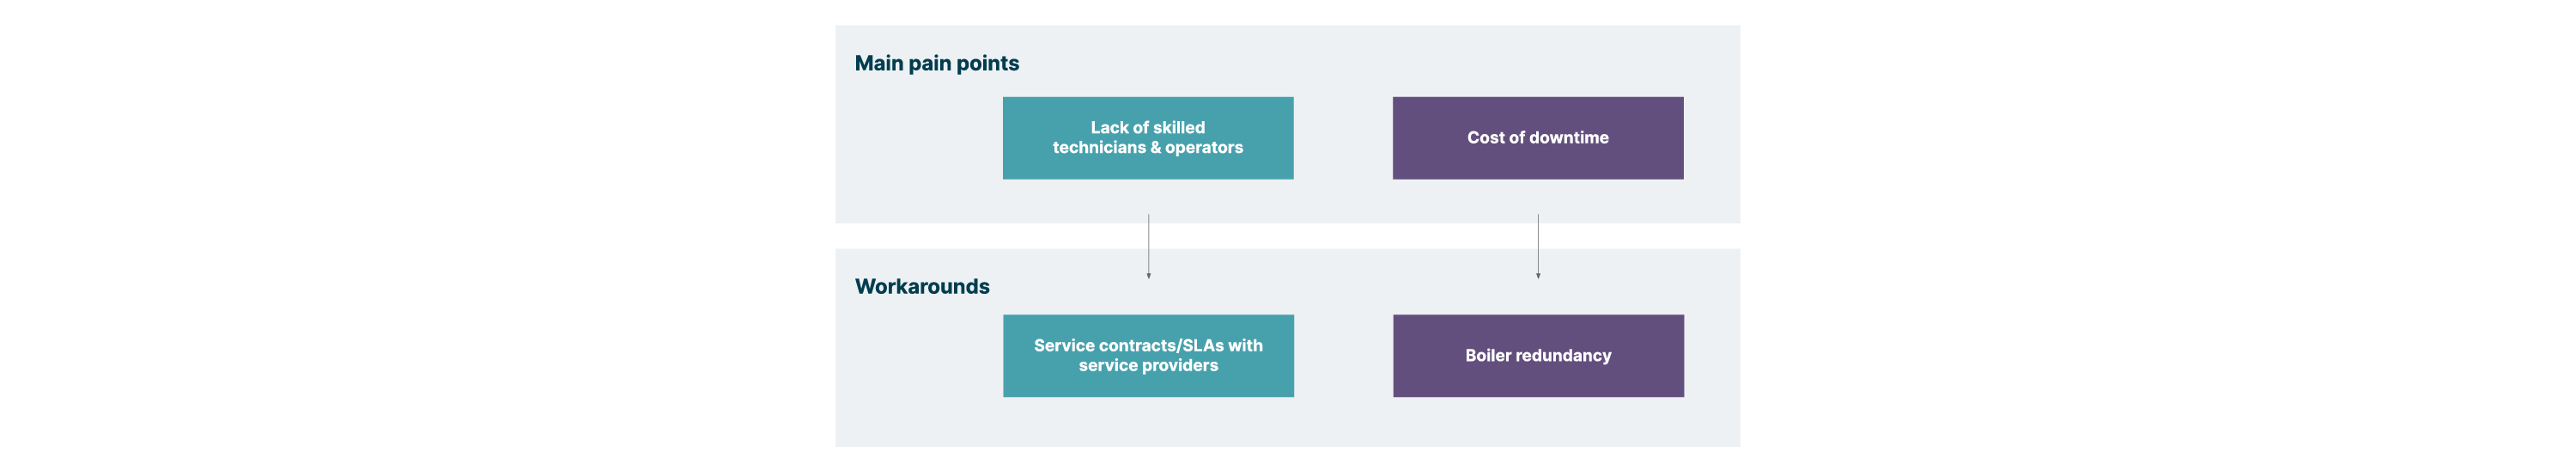 : A graphic depicting two industry pain points and their workarounds. The first pain point is the lack of skilled technicians and operators, which is addressed through service contracts or SLAs. The second pain point is the cost of downtime, which is addressed through equipment redundancy.